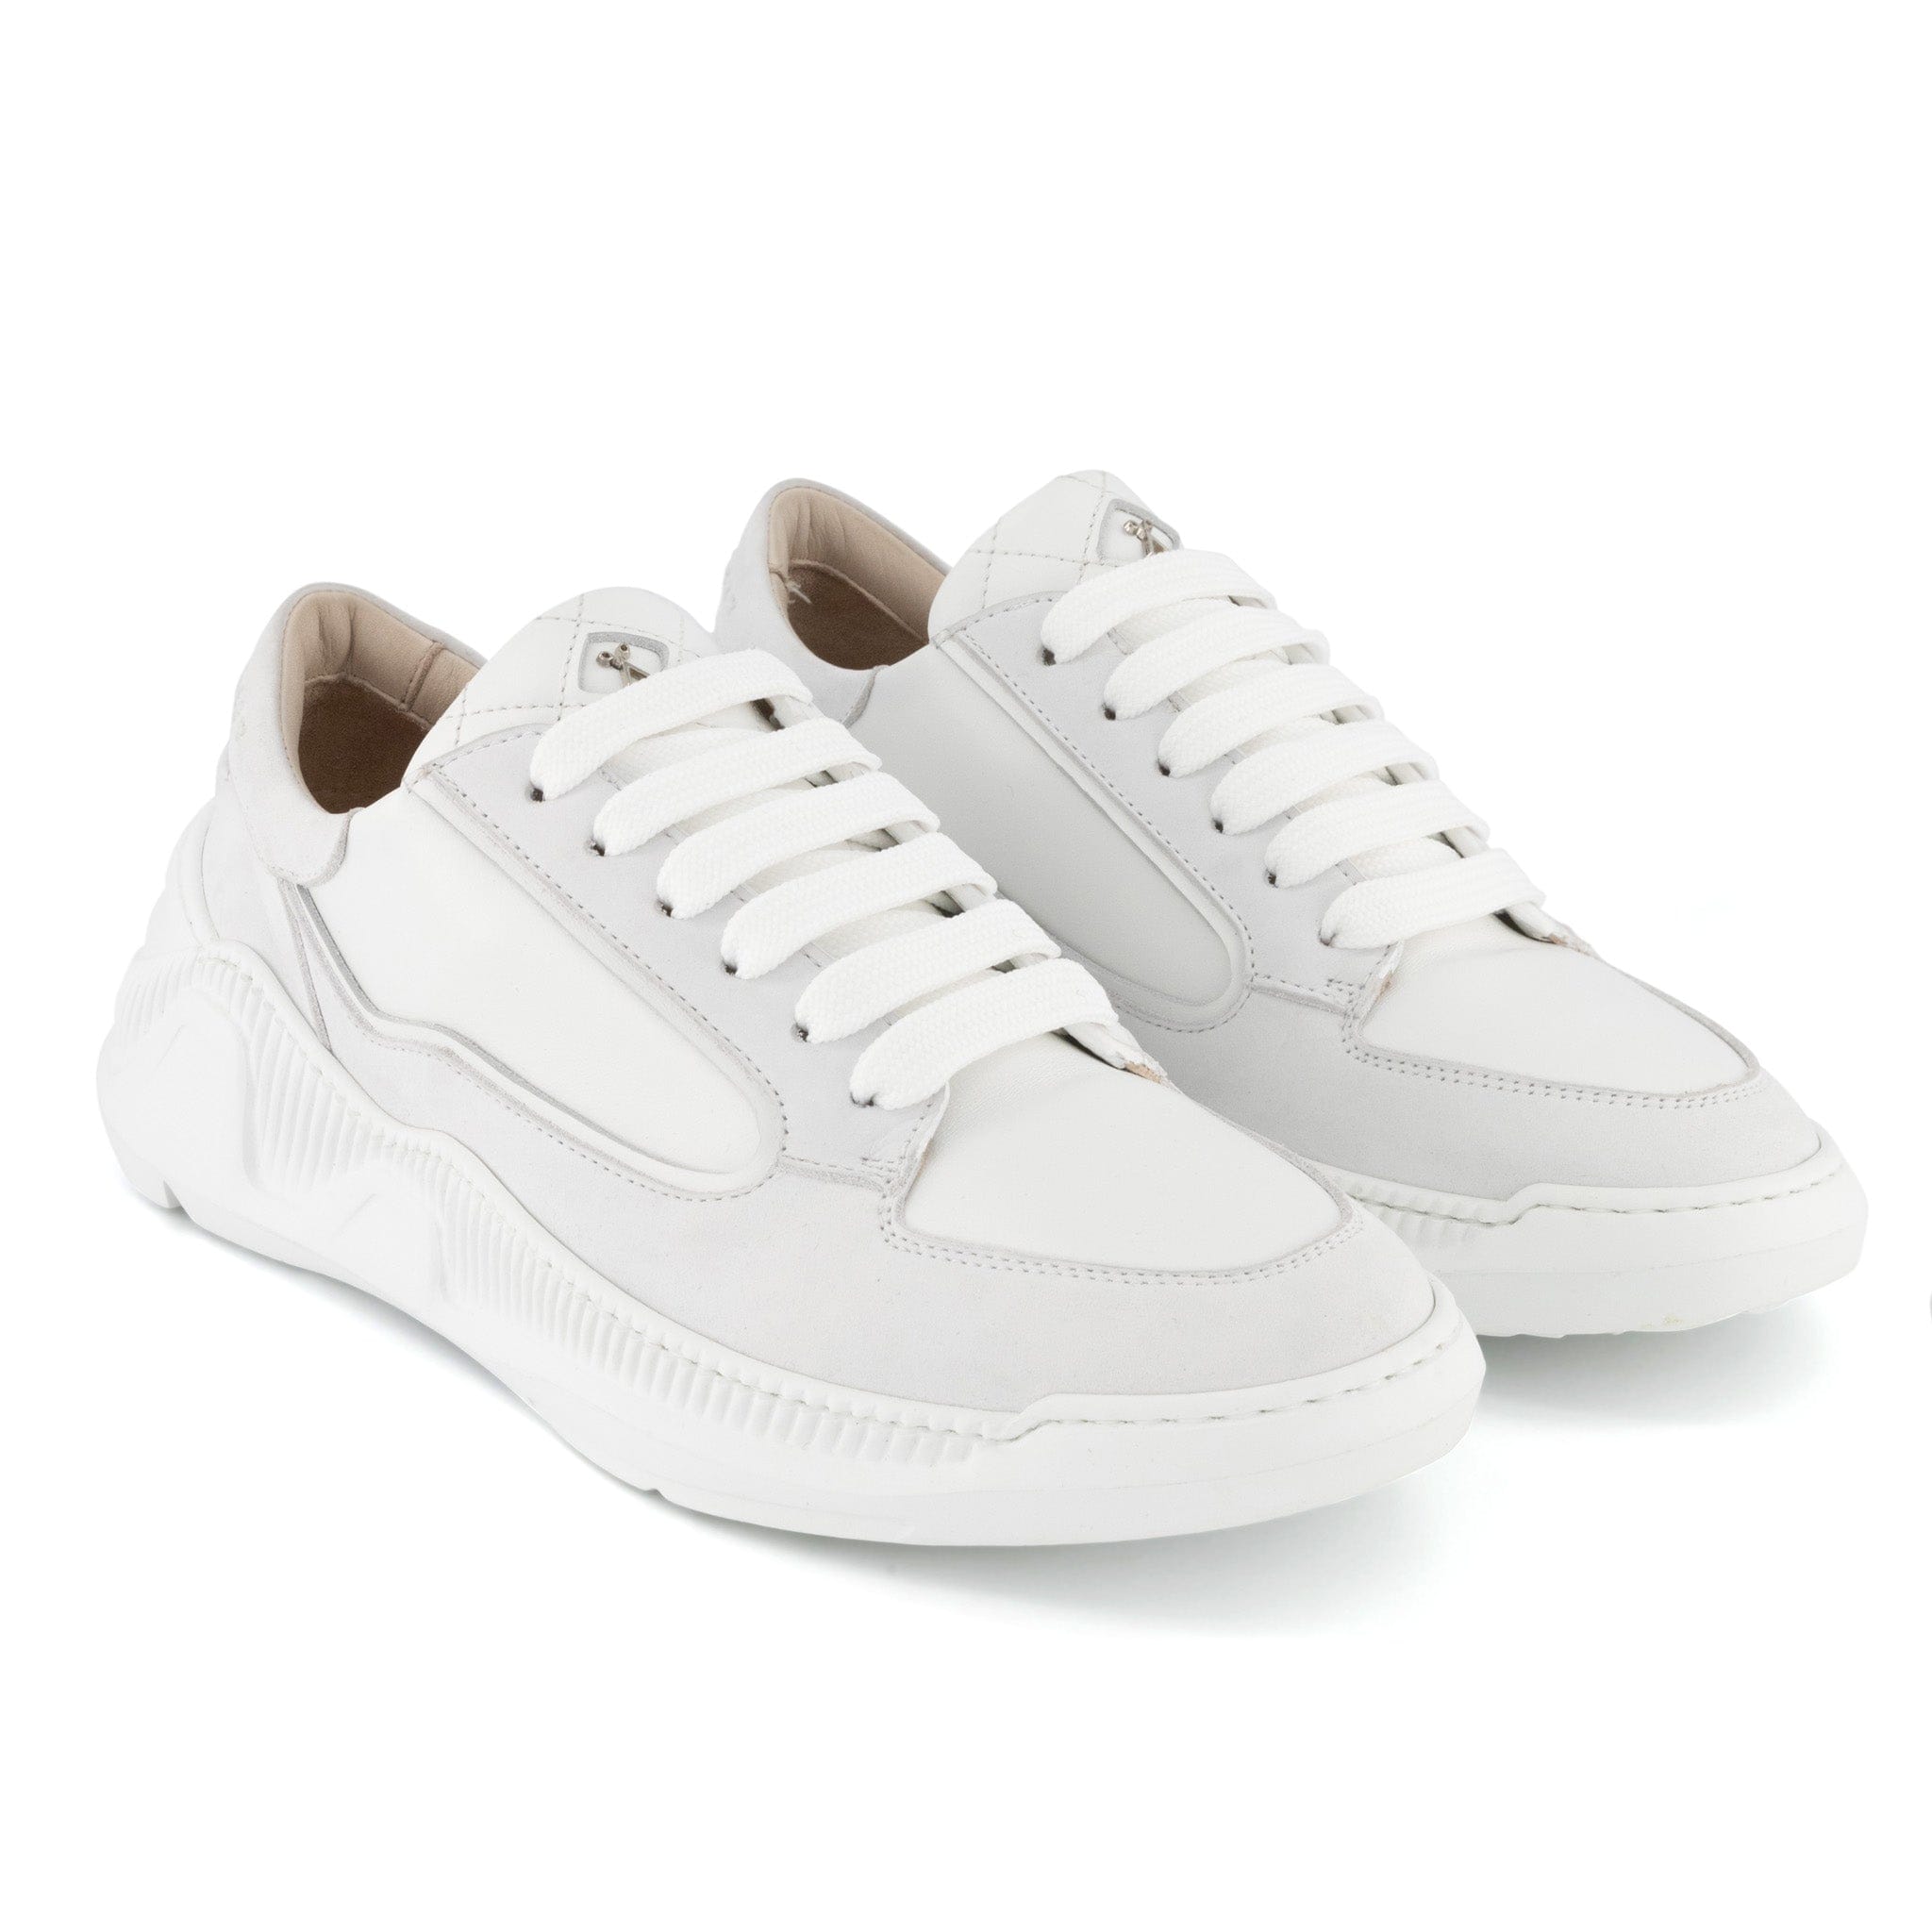 Nesto Low Top Italian Leather Sneaker | All White | Made in Italy